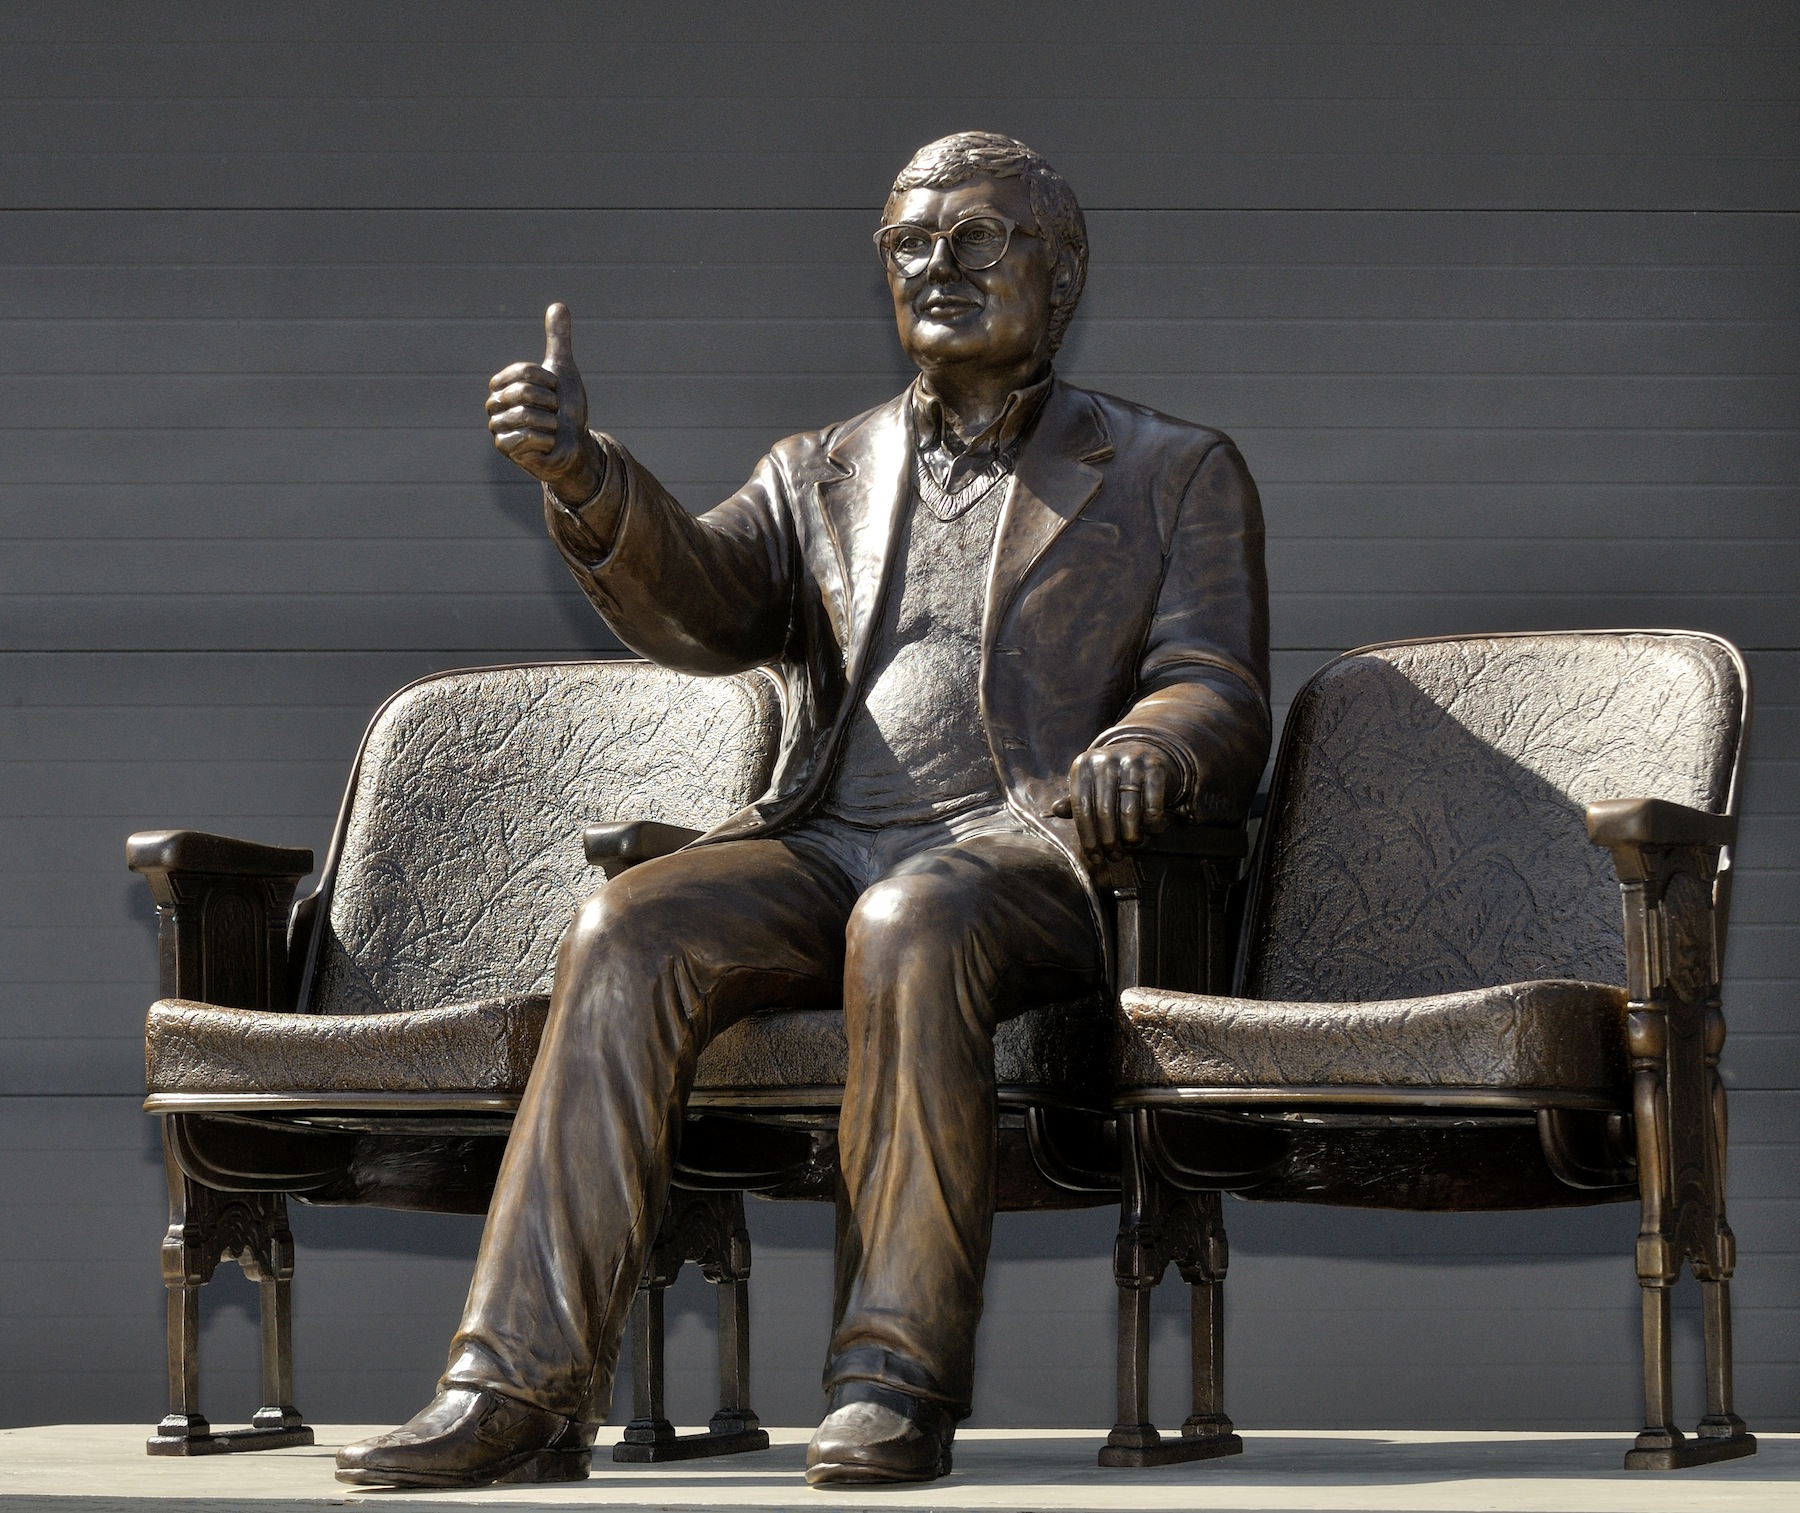 A bronze statue of Pulitzer Prize winning film critic Roger Ebert giving his famous 'thumbs up